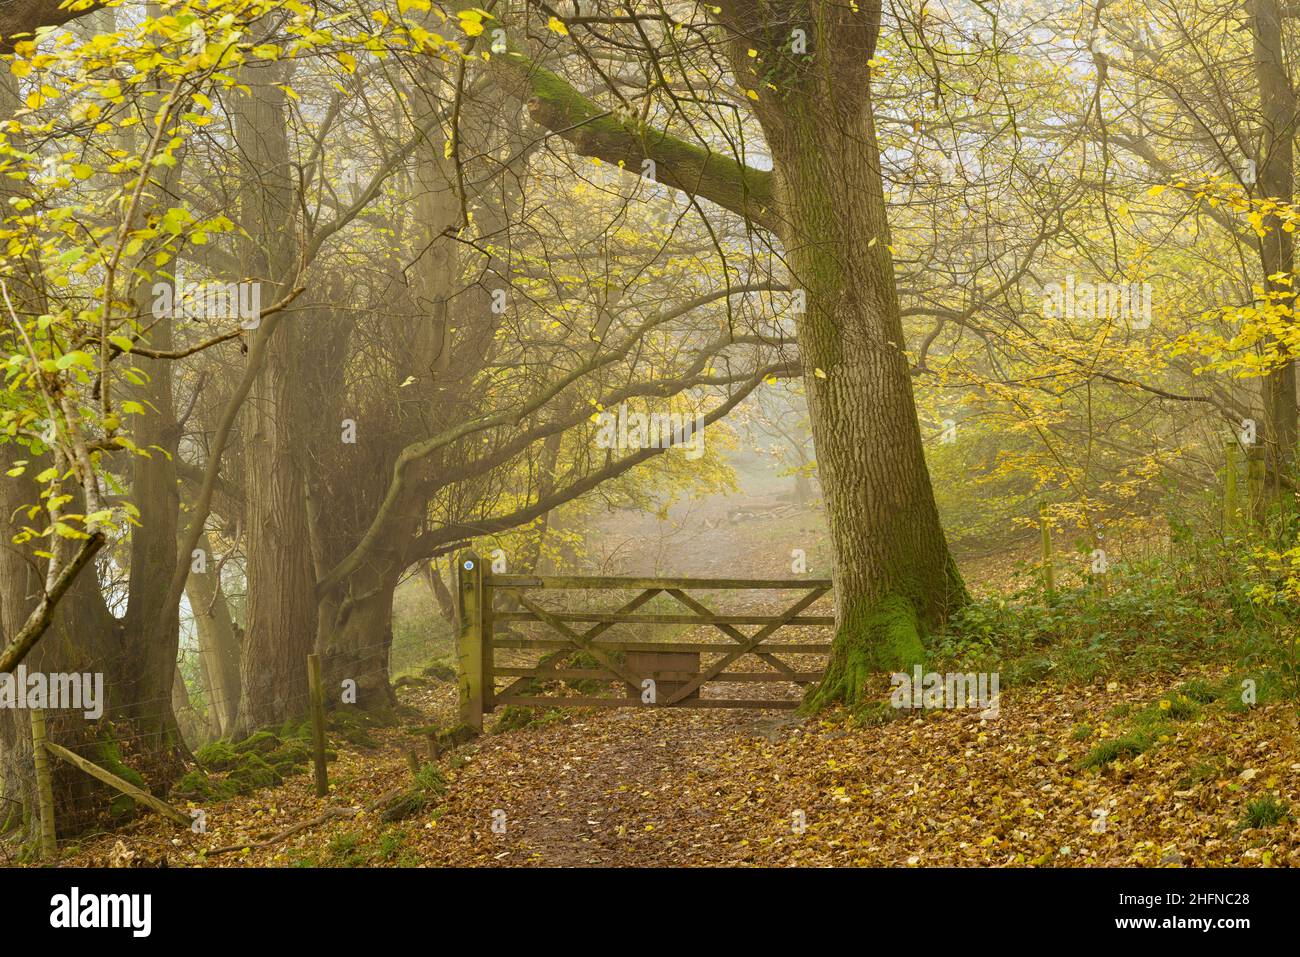 Autumn at King's Wood, an ancient broadleaf woodland in the Mendip Hills National Landscape, Somerset, England. Stock Photo